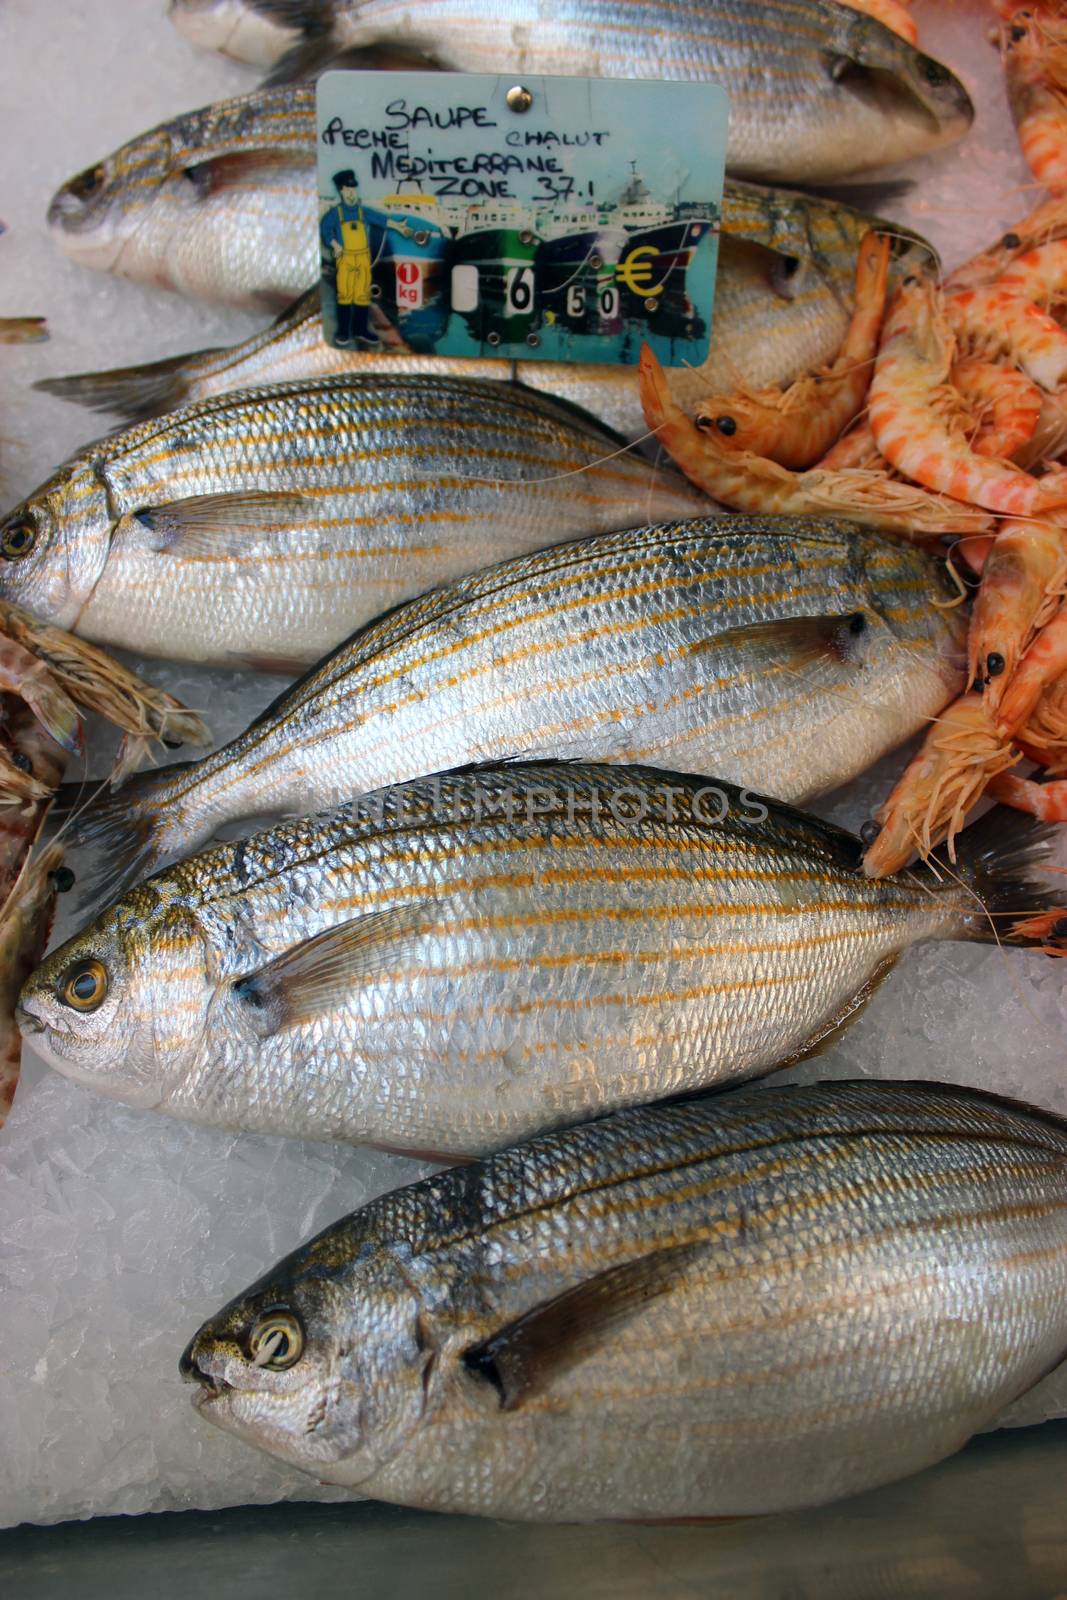 Sarpa salpa fish at the market in Aix-En-Provence, France. This fish can cause hallucinations 